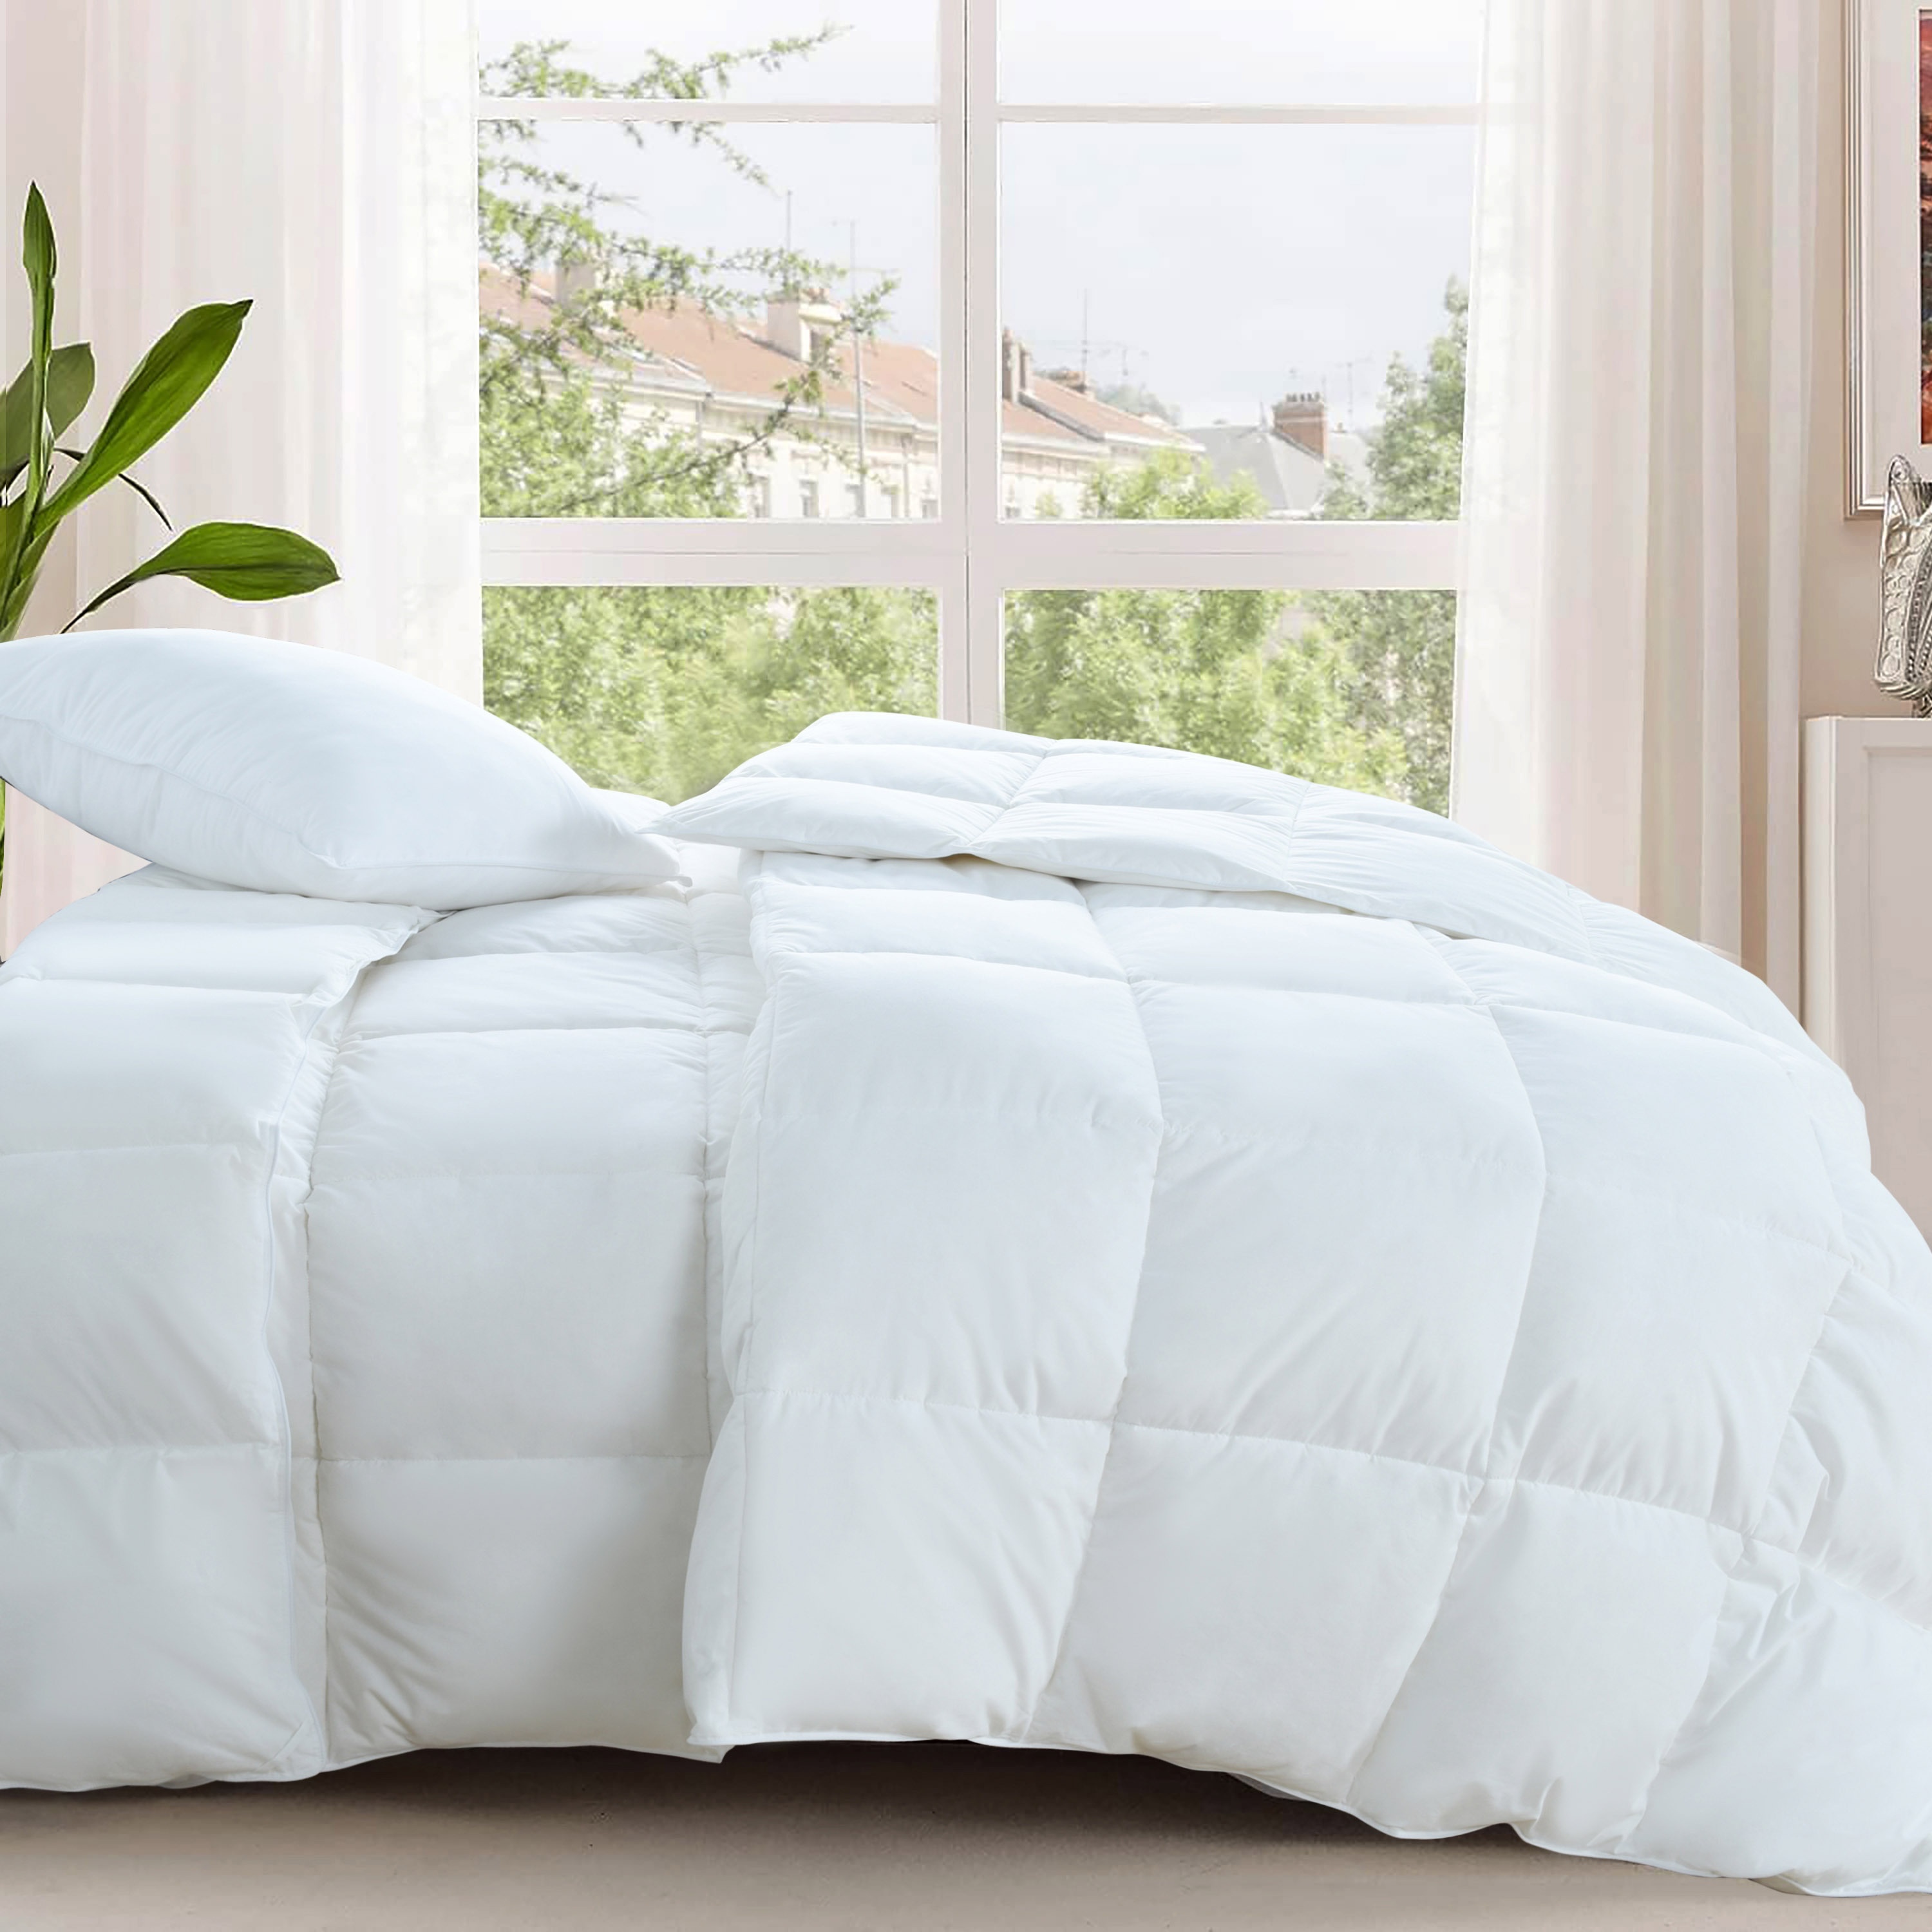 

Feather Down Comforter, Luxurious Quilted Bedding Duvet Insert With 100% Cotton Shell, Lightweight Fluffy Hotel Bedding Comforter For All Season Medium Warmth